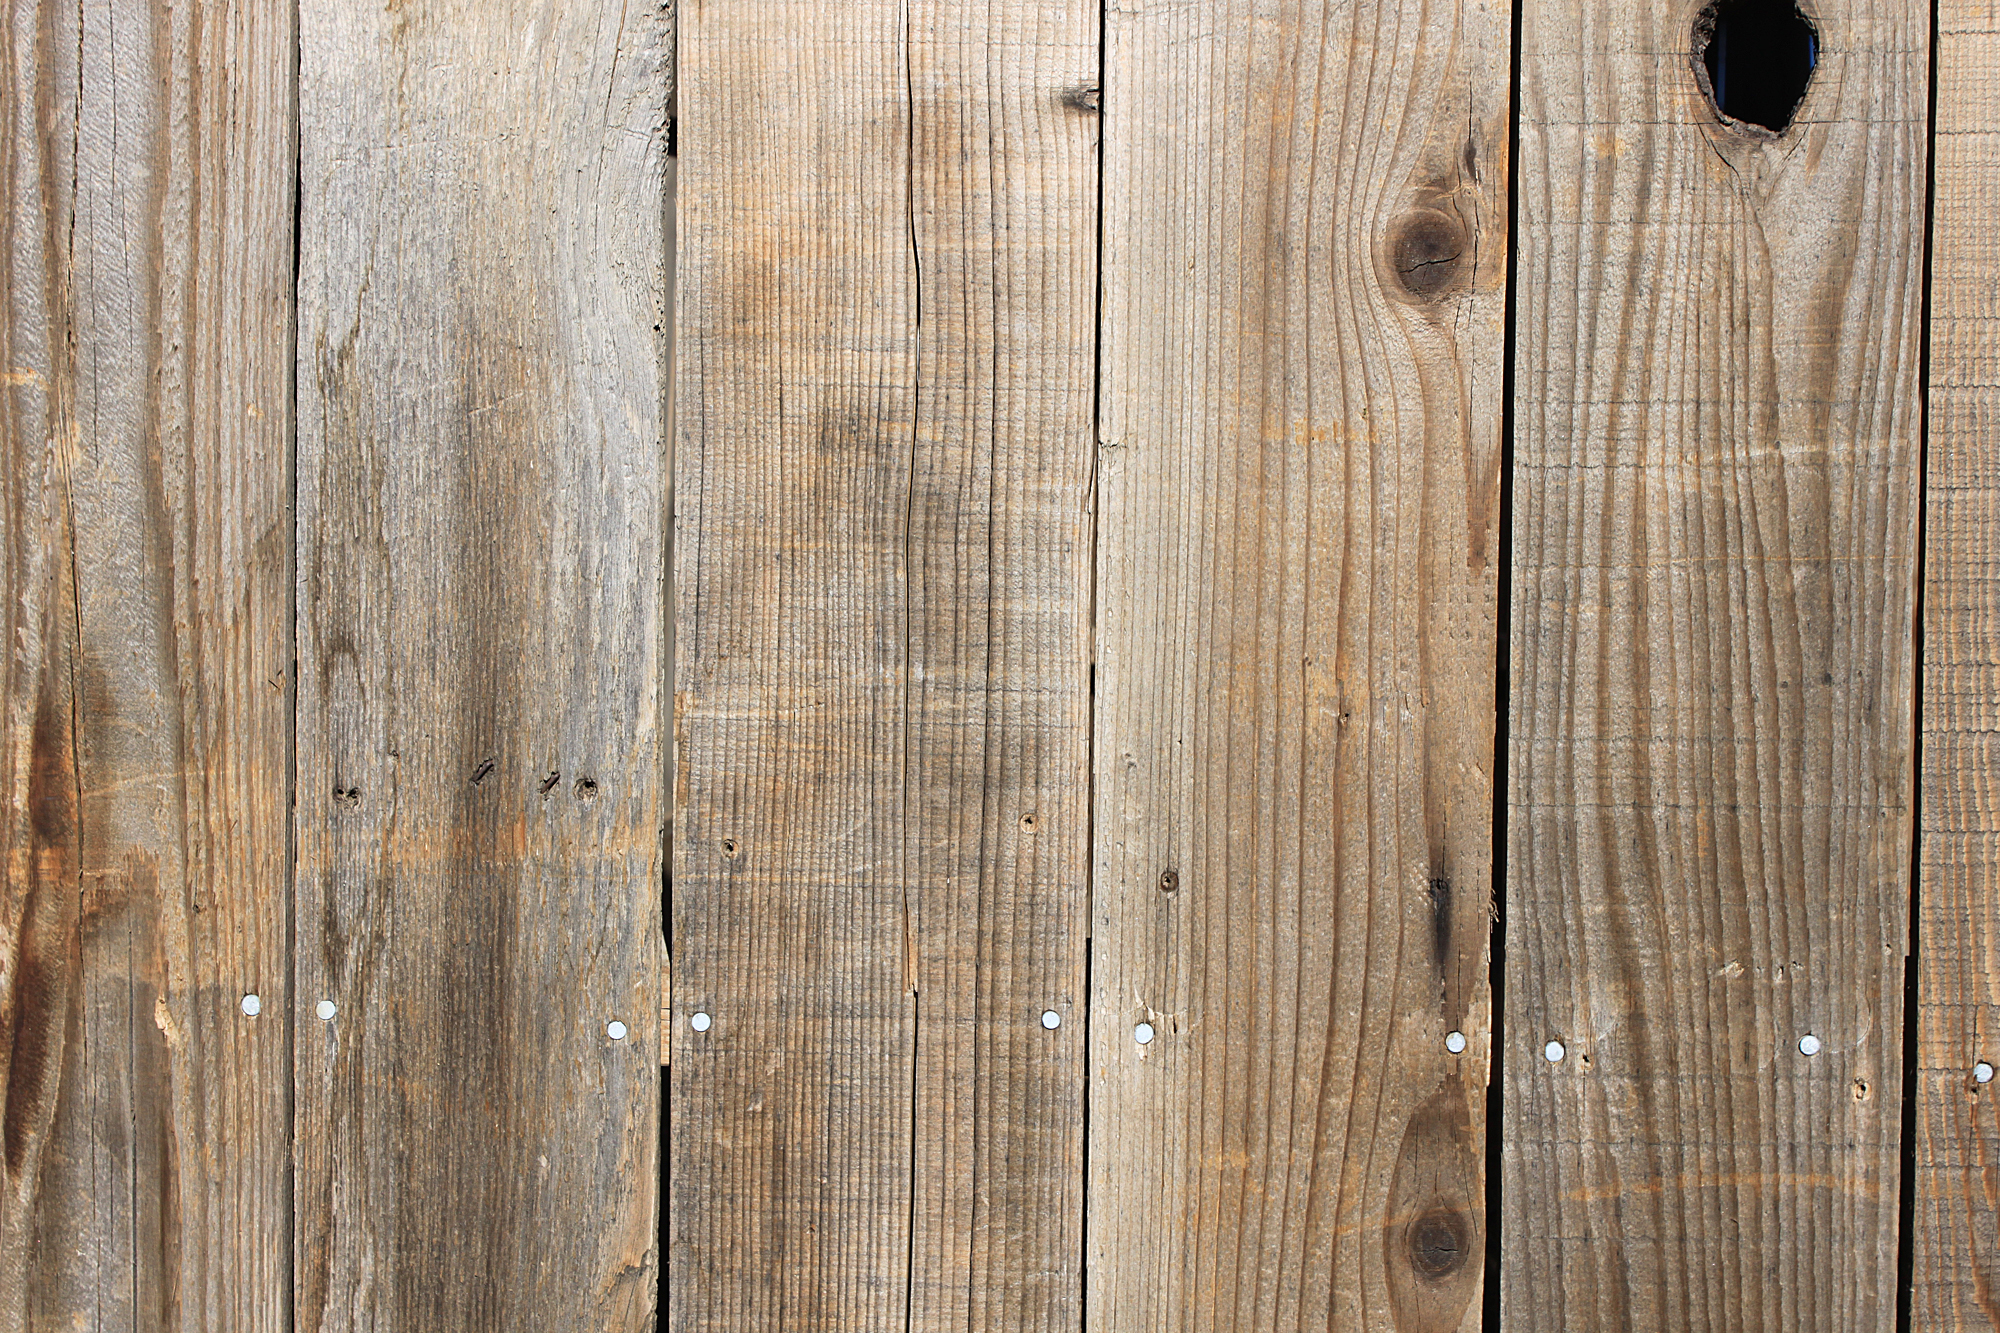 Totally High Res Rustic Wooden Textures And Graphic Elements